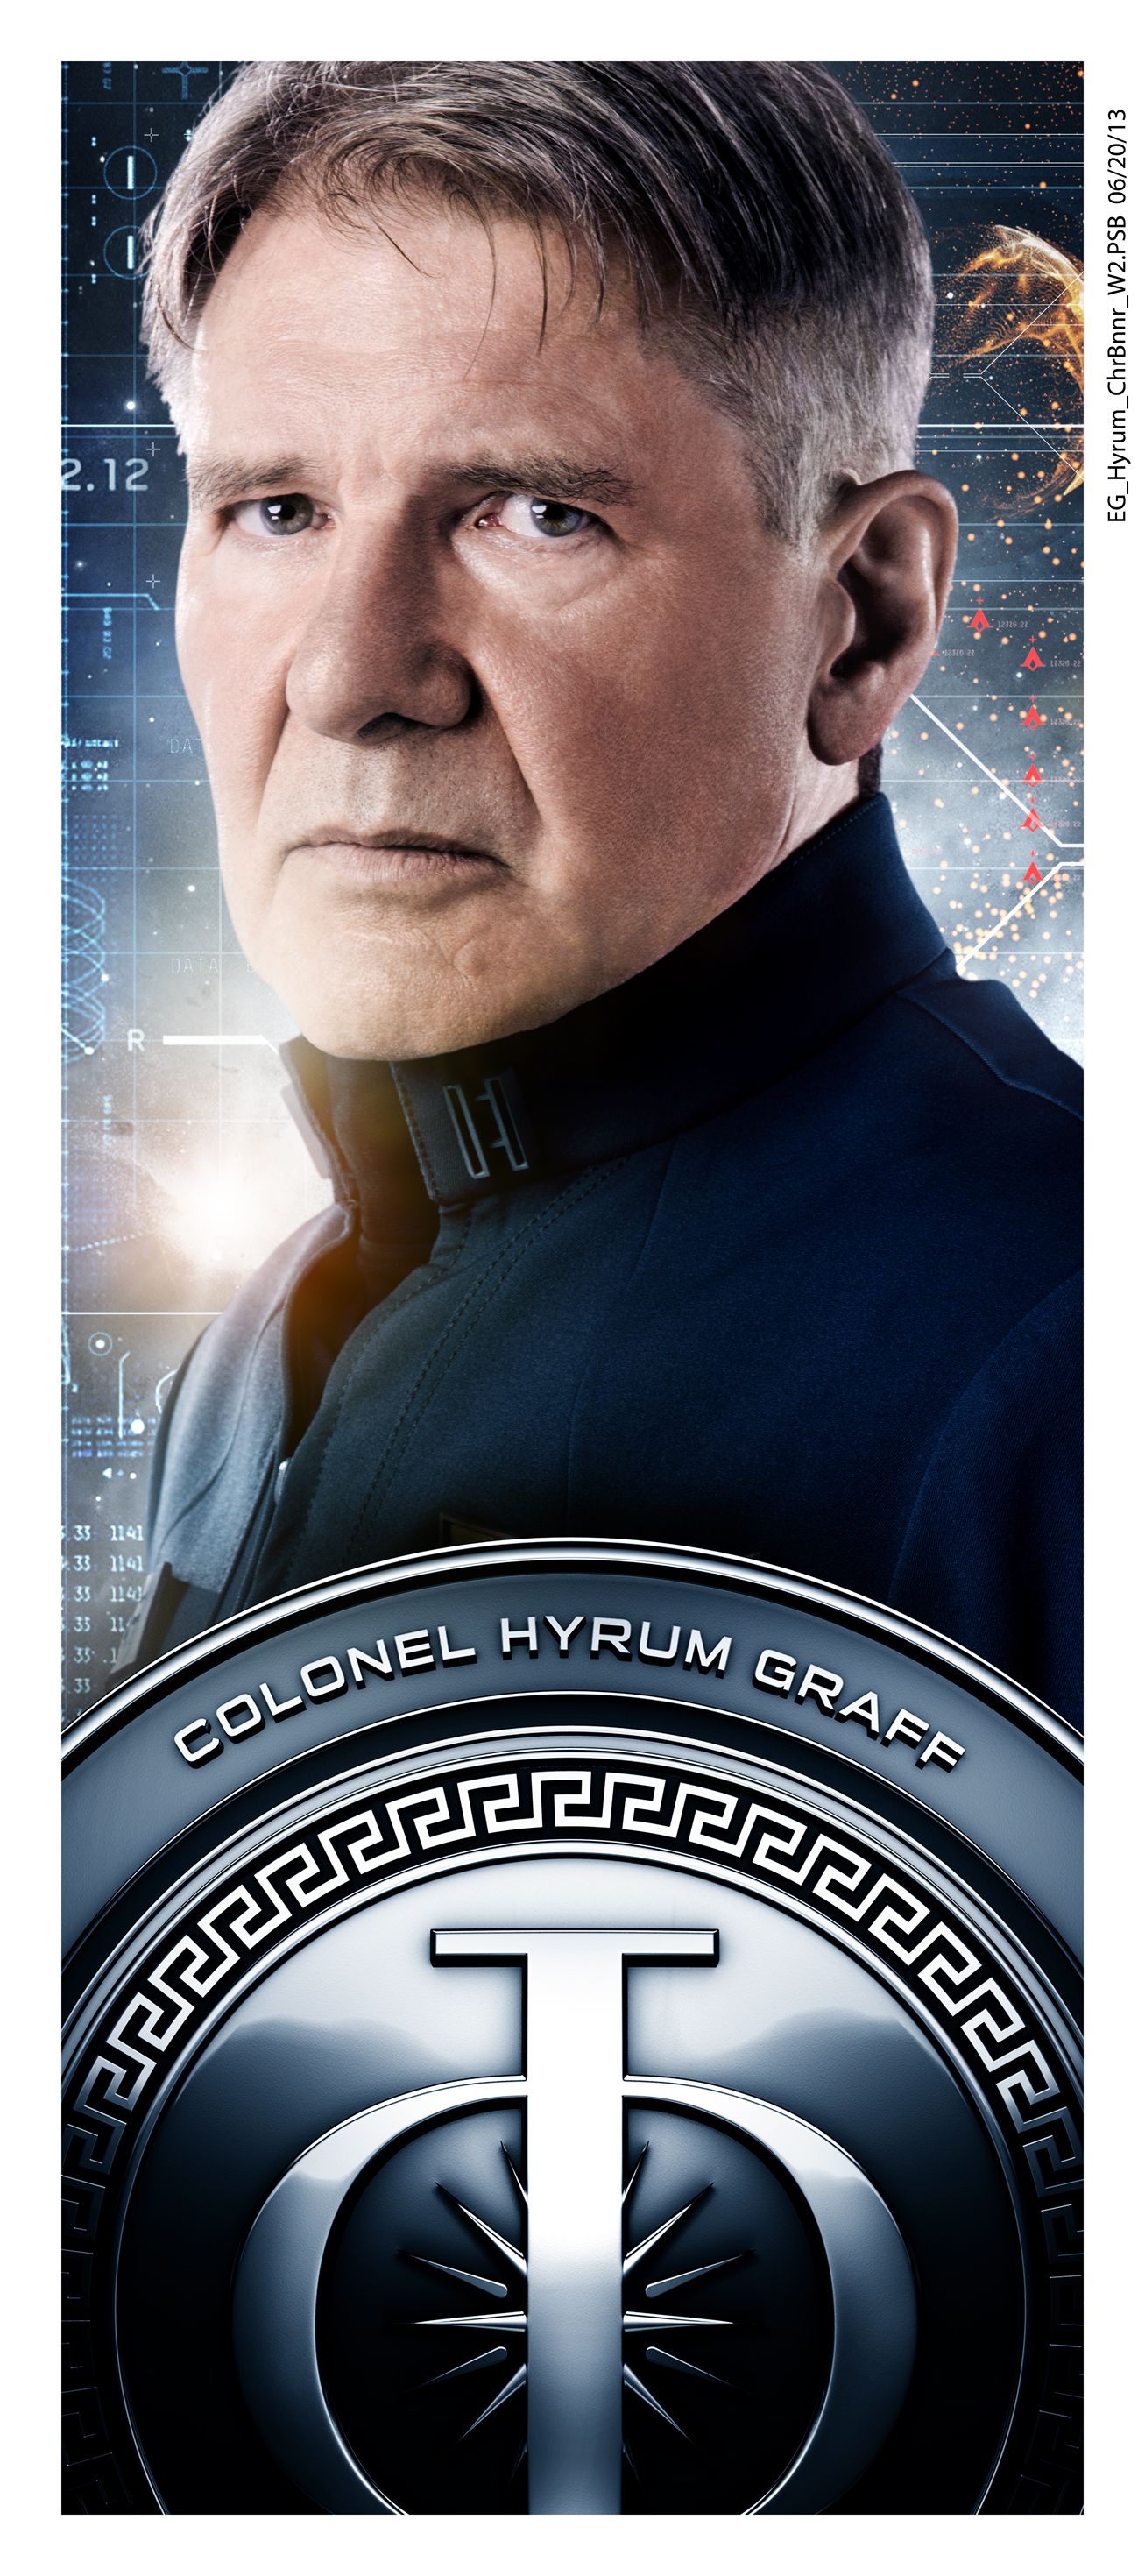 Ender's Game Harrison Ford Character Poster